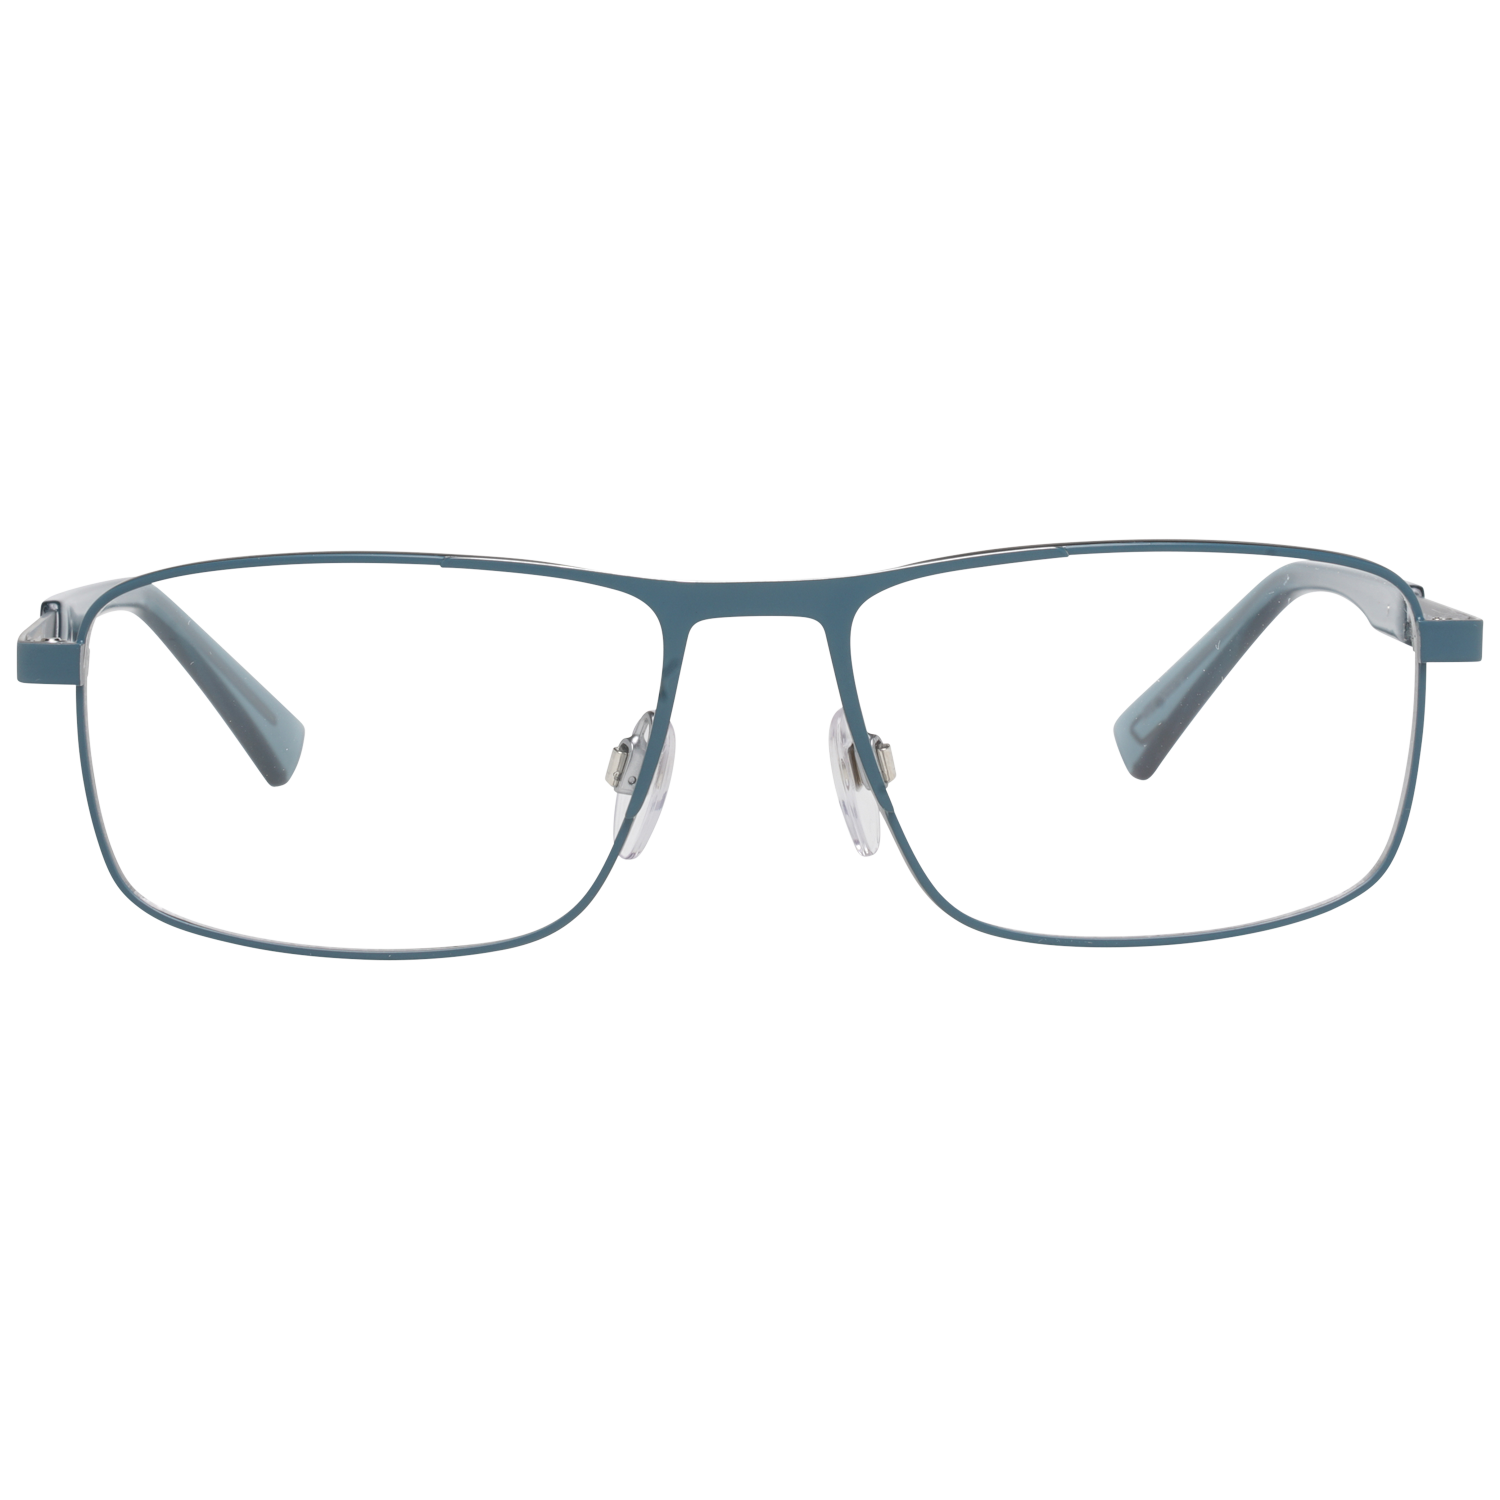 GenderMenMain colorBlueFrame colorBlueFrame materialMetal & PlasticSize55-16-145Lenses width55mmLenses heigth38mmBridge length16mmFrame width140mmTemple length145mmShipment includesCase, Cleaning clothStyleFull-RimSpring hingeNo